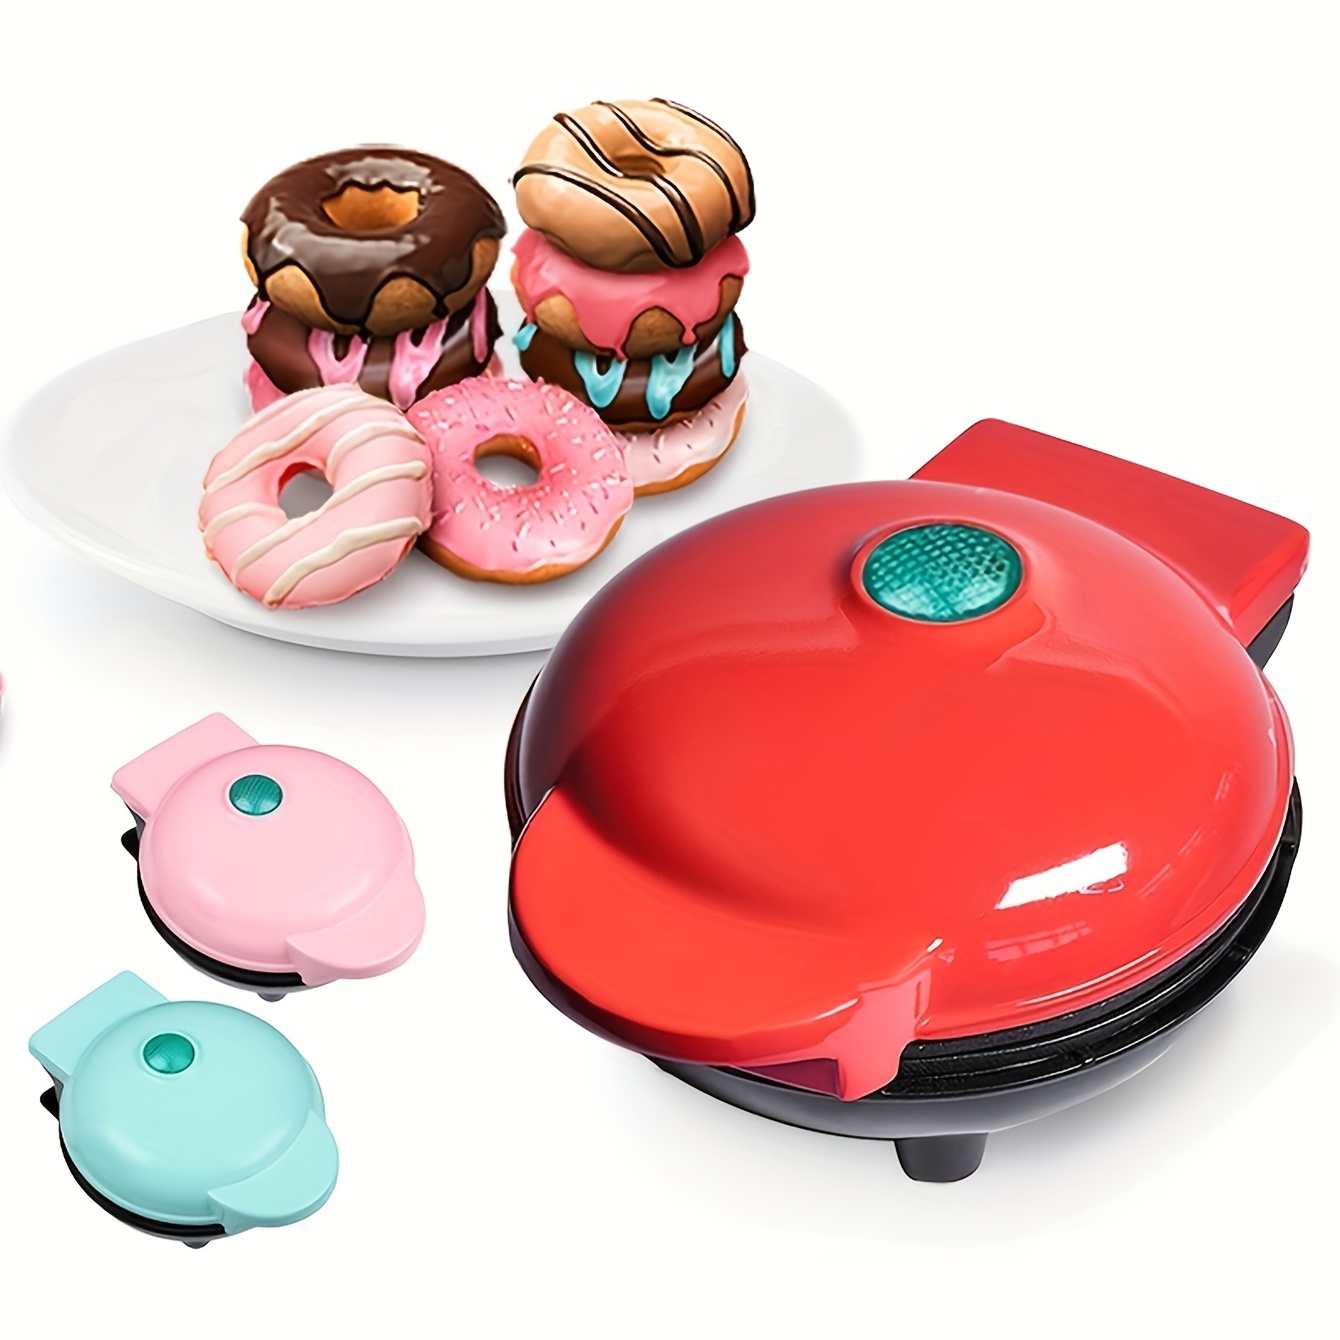 Electric Non-Stick Donut Maker Machine - Mini Donut Maker Machine for Makes  7 Doughnuts, Dual-Sided Heating, Compact and Portable Design for Family